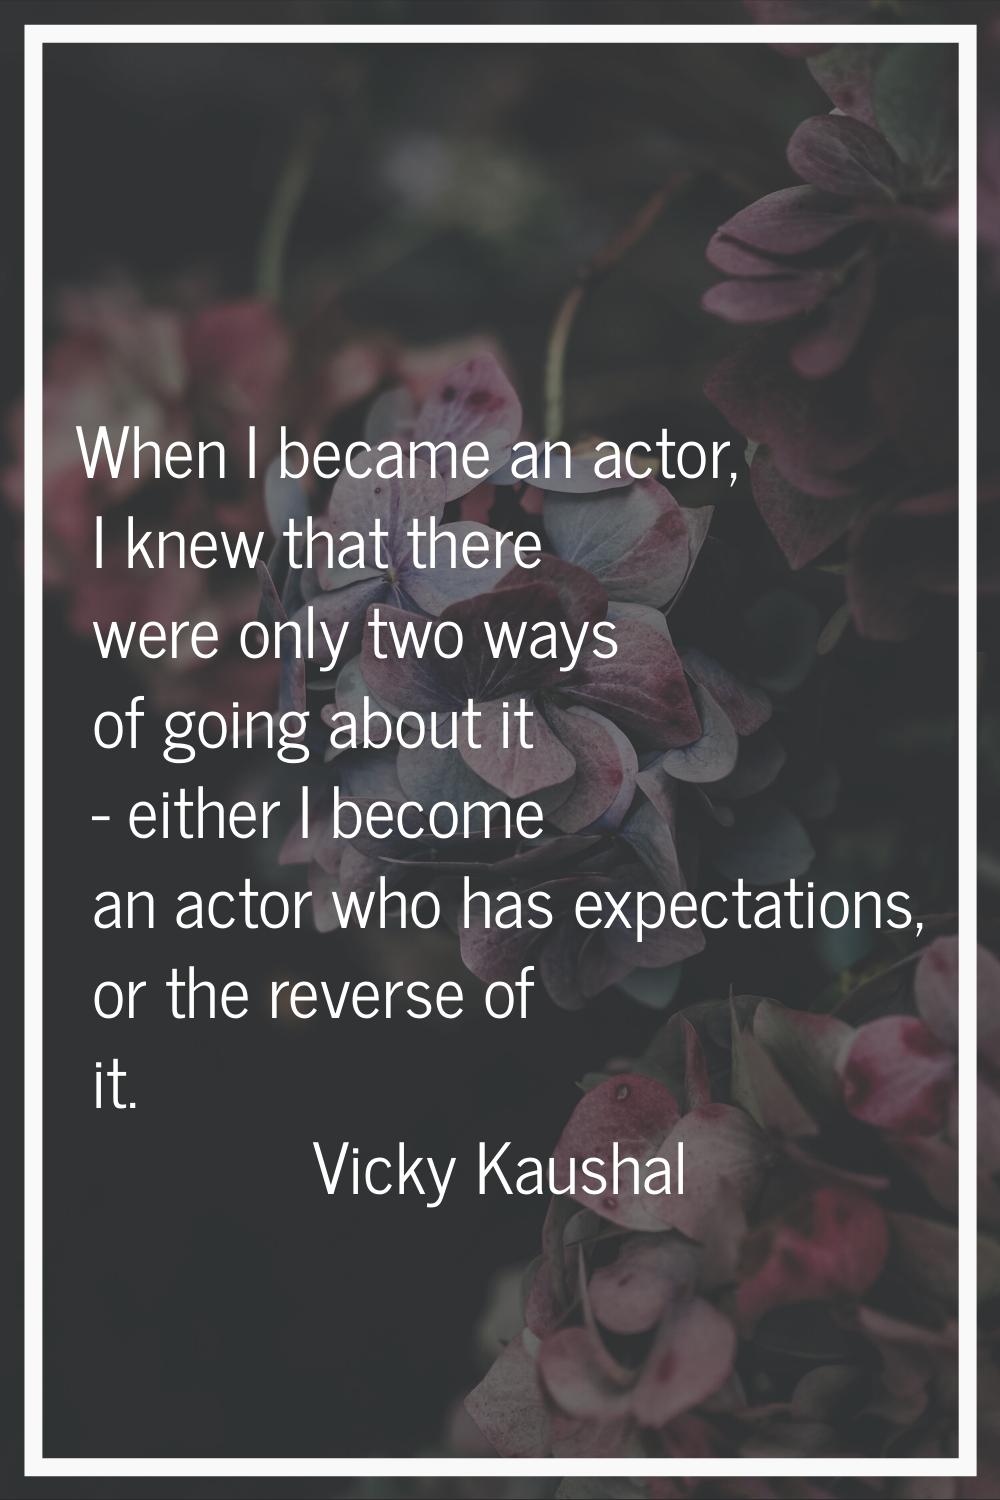 When I became an actor, I knew that there were only two ways of going about it - either I become an